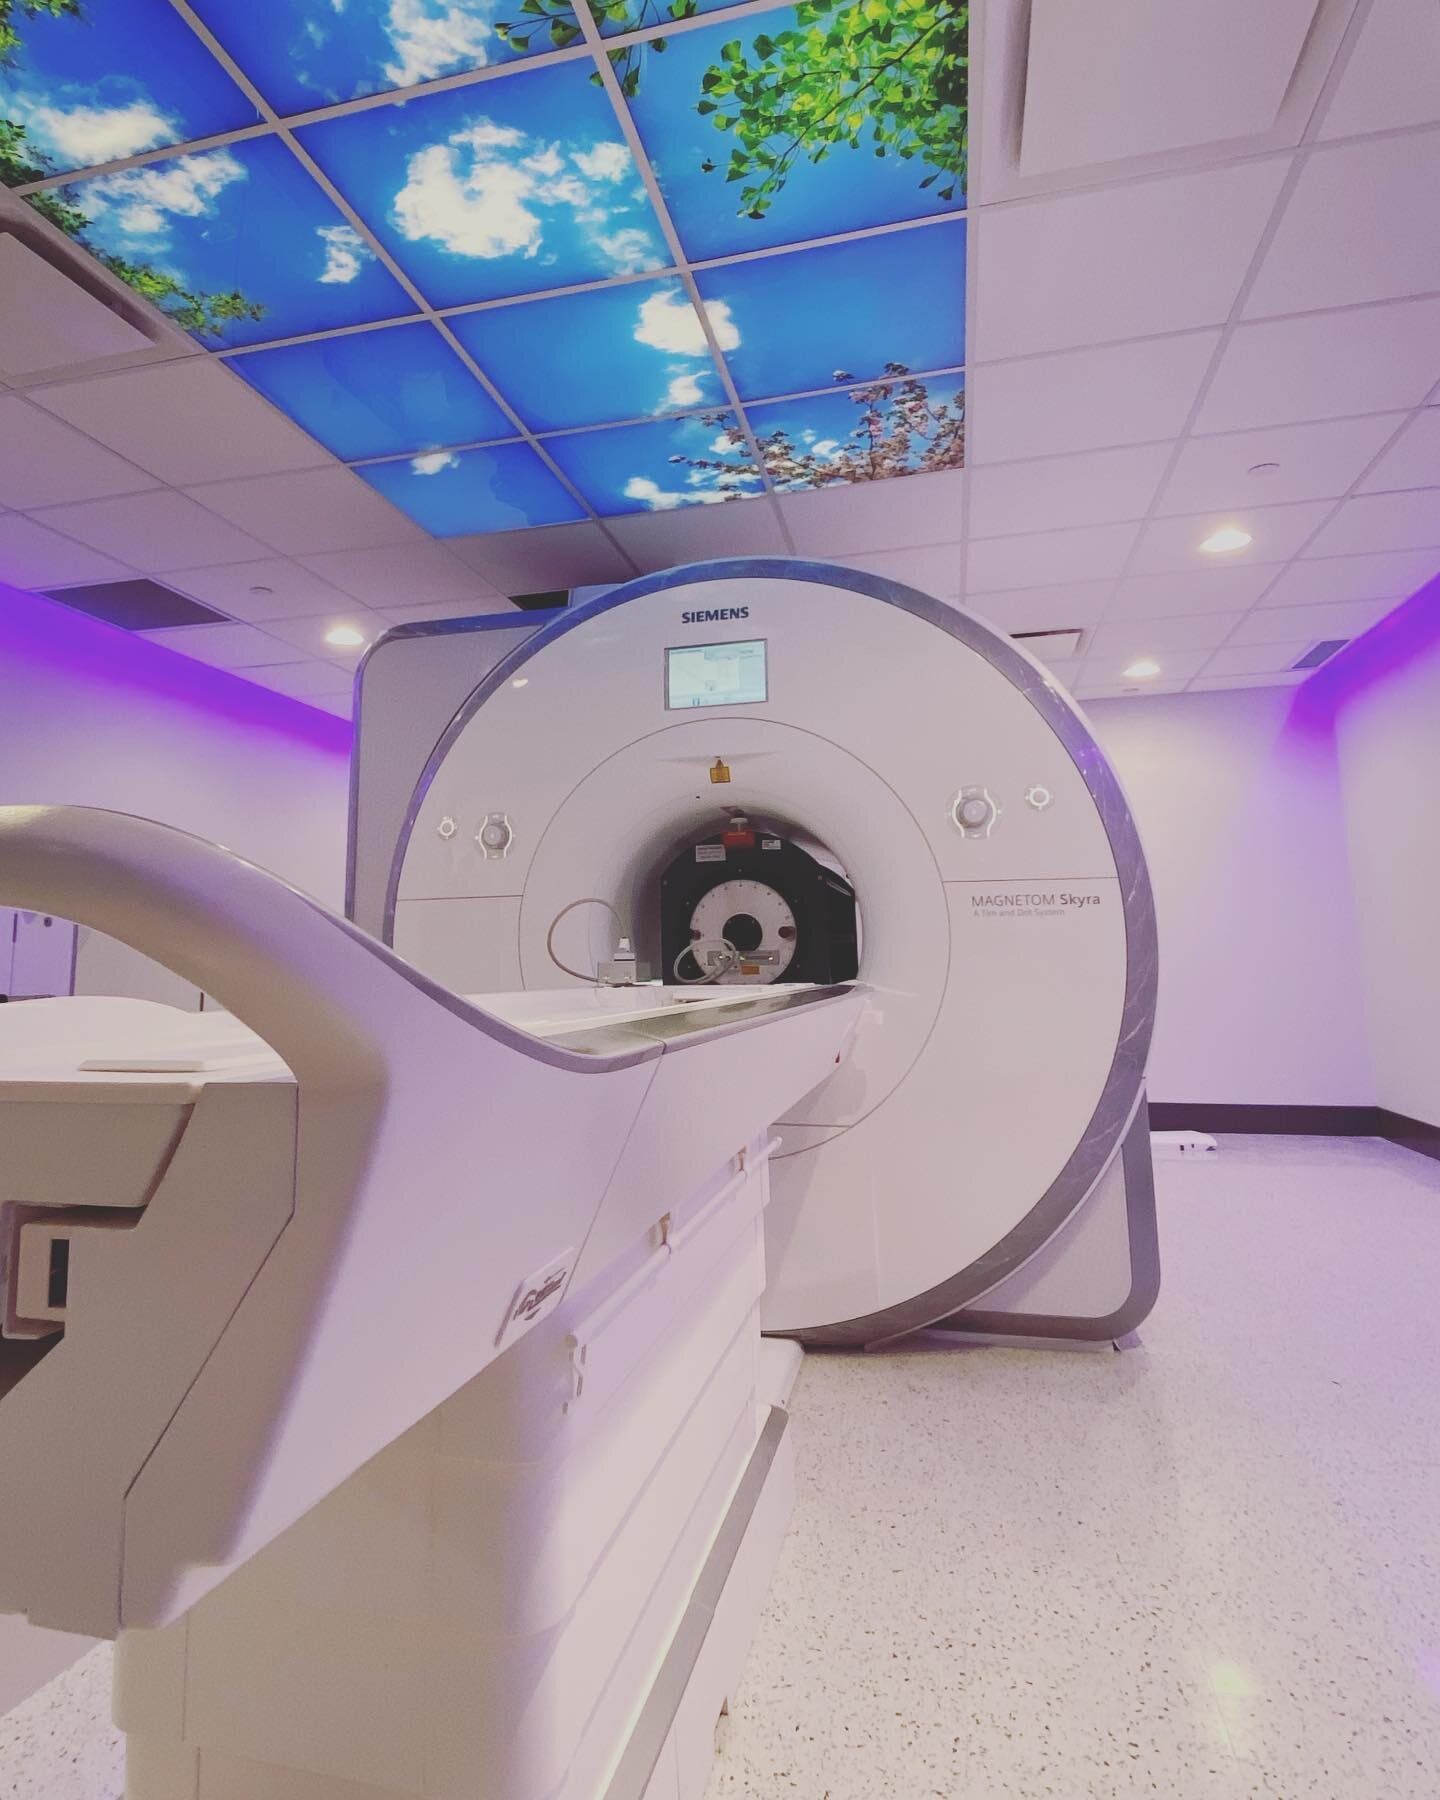 There is so much complexity behind designing and constructing an MRI suite. The success in executing such a specialty space relies heavily on the collaboration between many disciplines. IDEALAB couldn&rsquo;t be prouder of this achievement and is so 